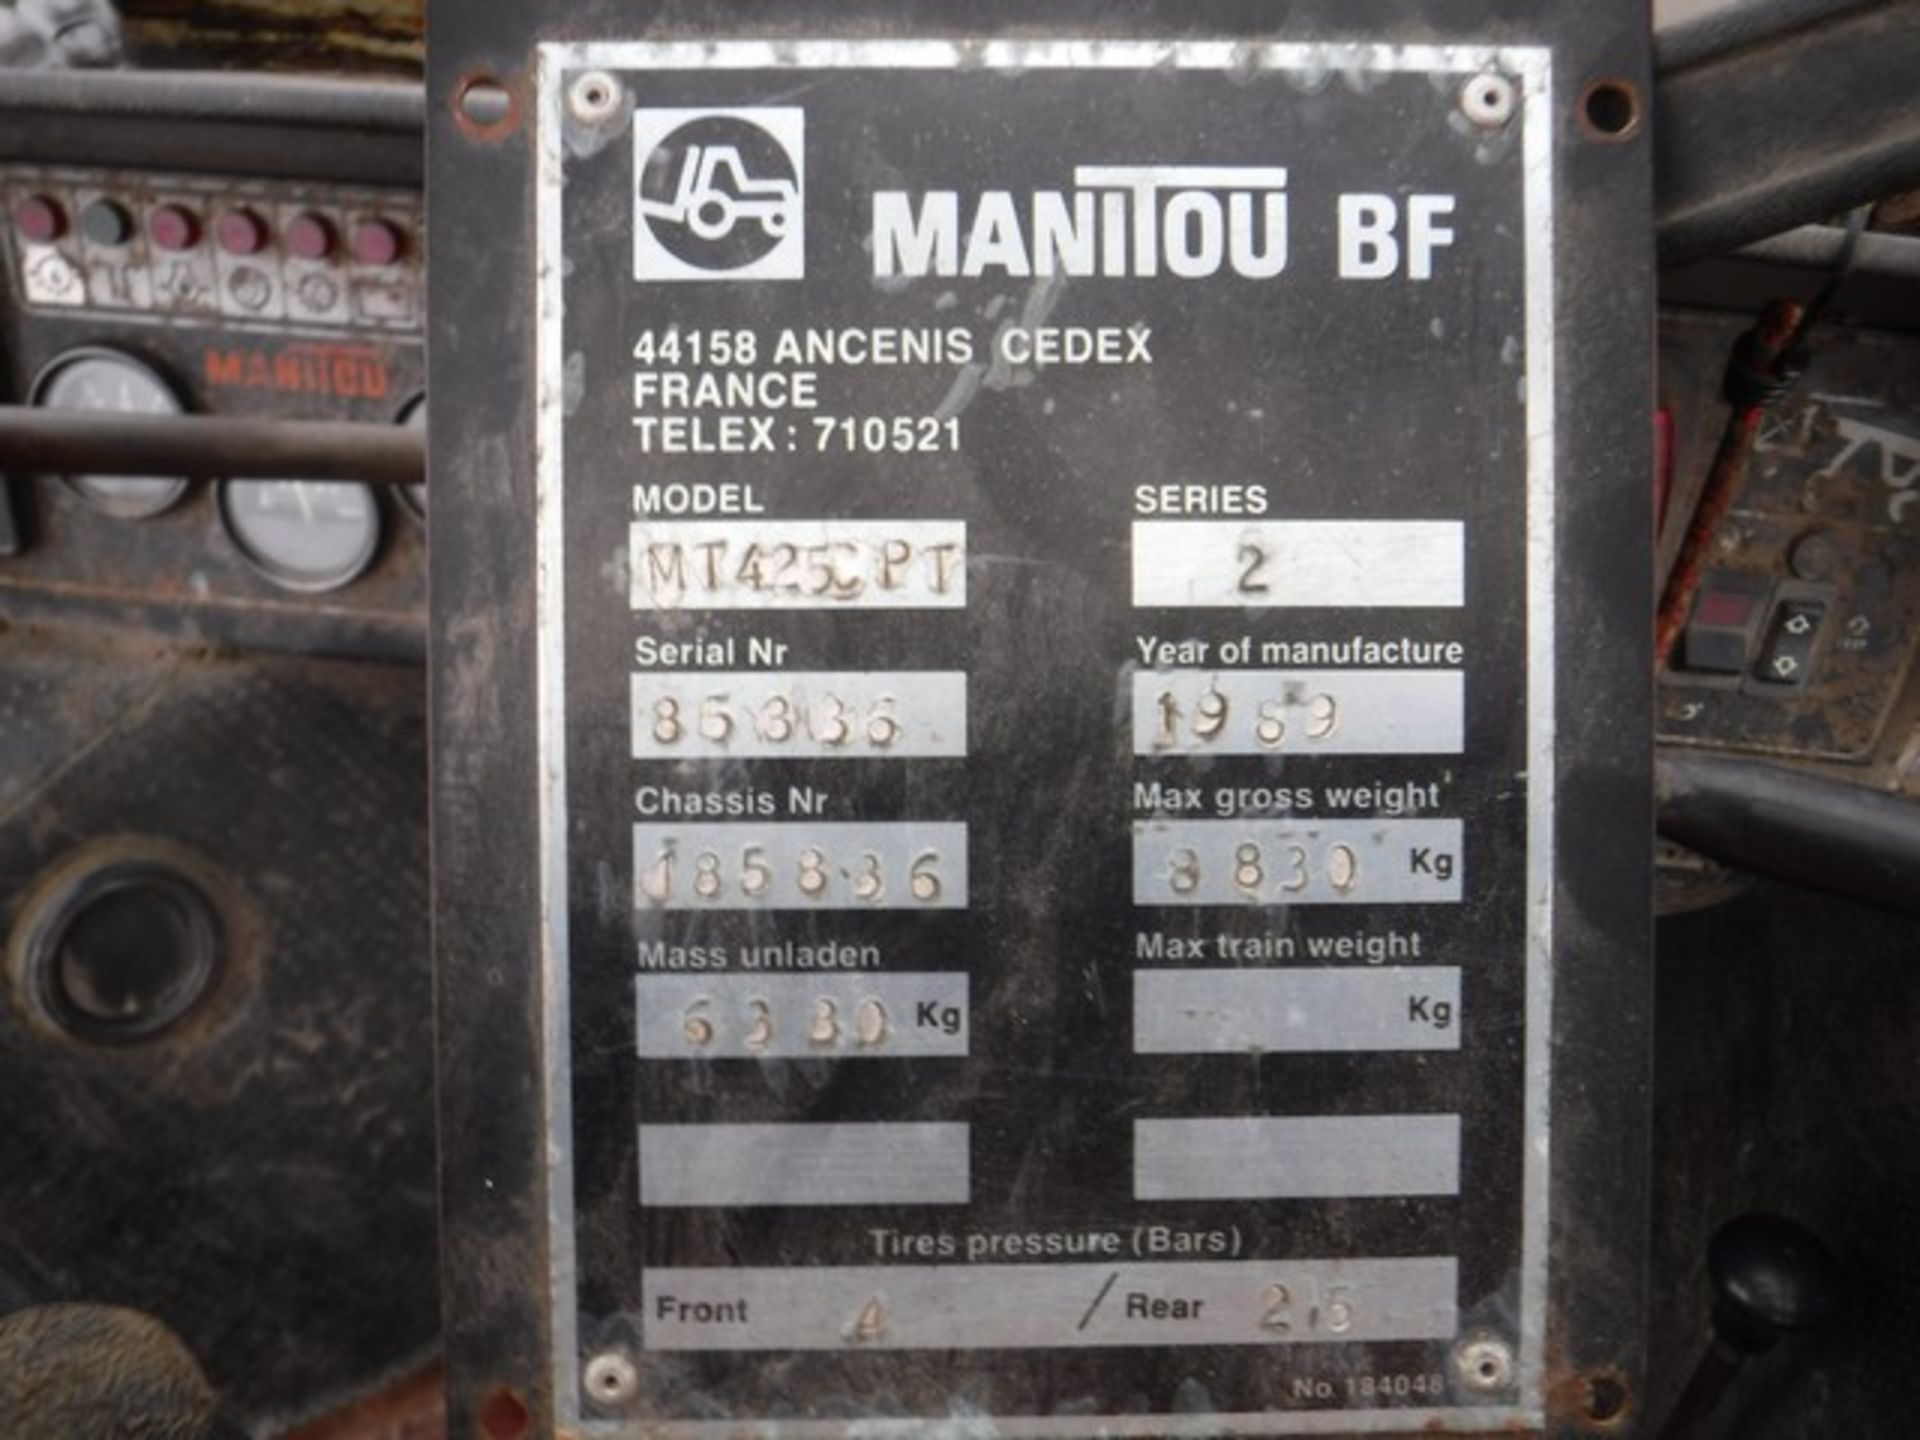 1989 MANITOU TURBO, MODEL - MT425CPT, SERIES 2, CHASSIS 185836, 5693HRS (NOT VERIFIED) ** 10% BUYERS - Image 7 of 15